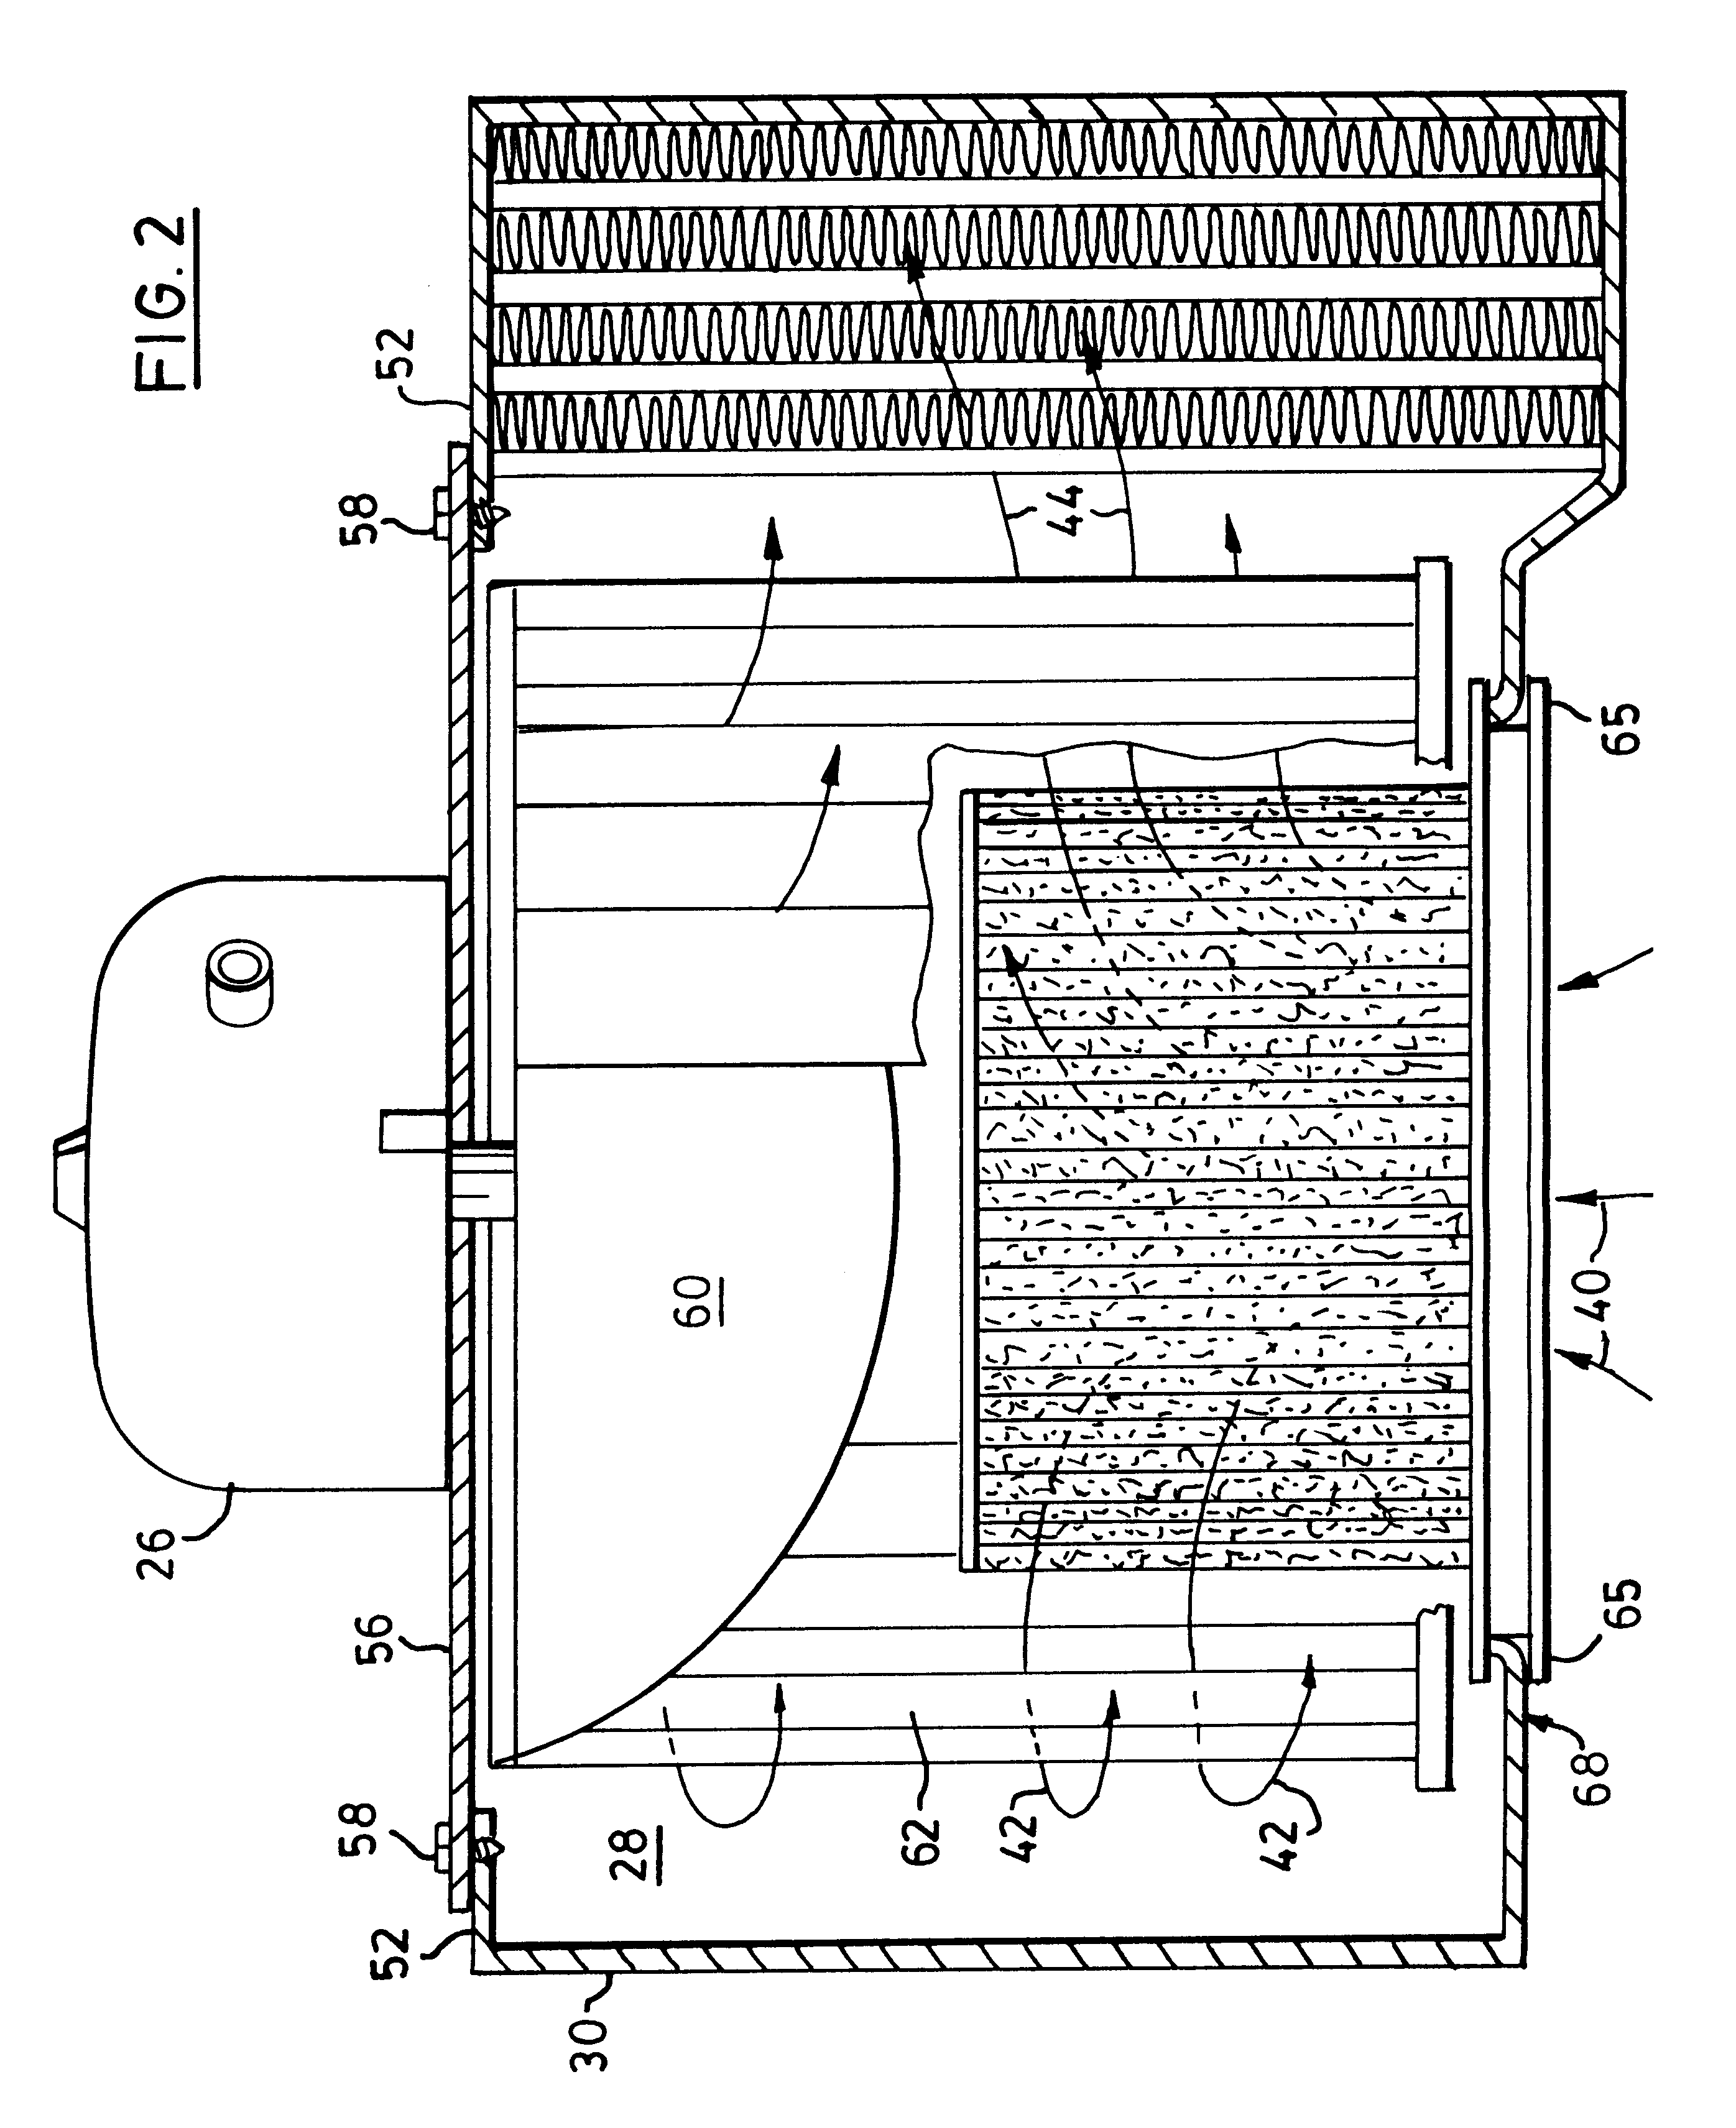 Occupant air filter for vehicles